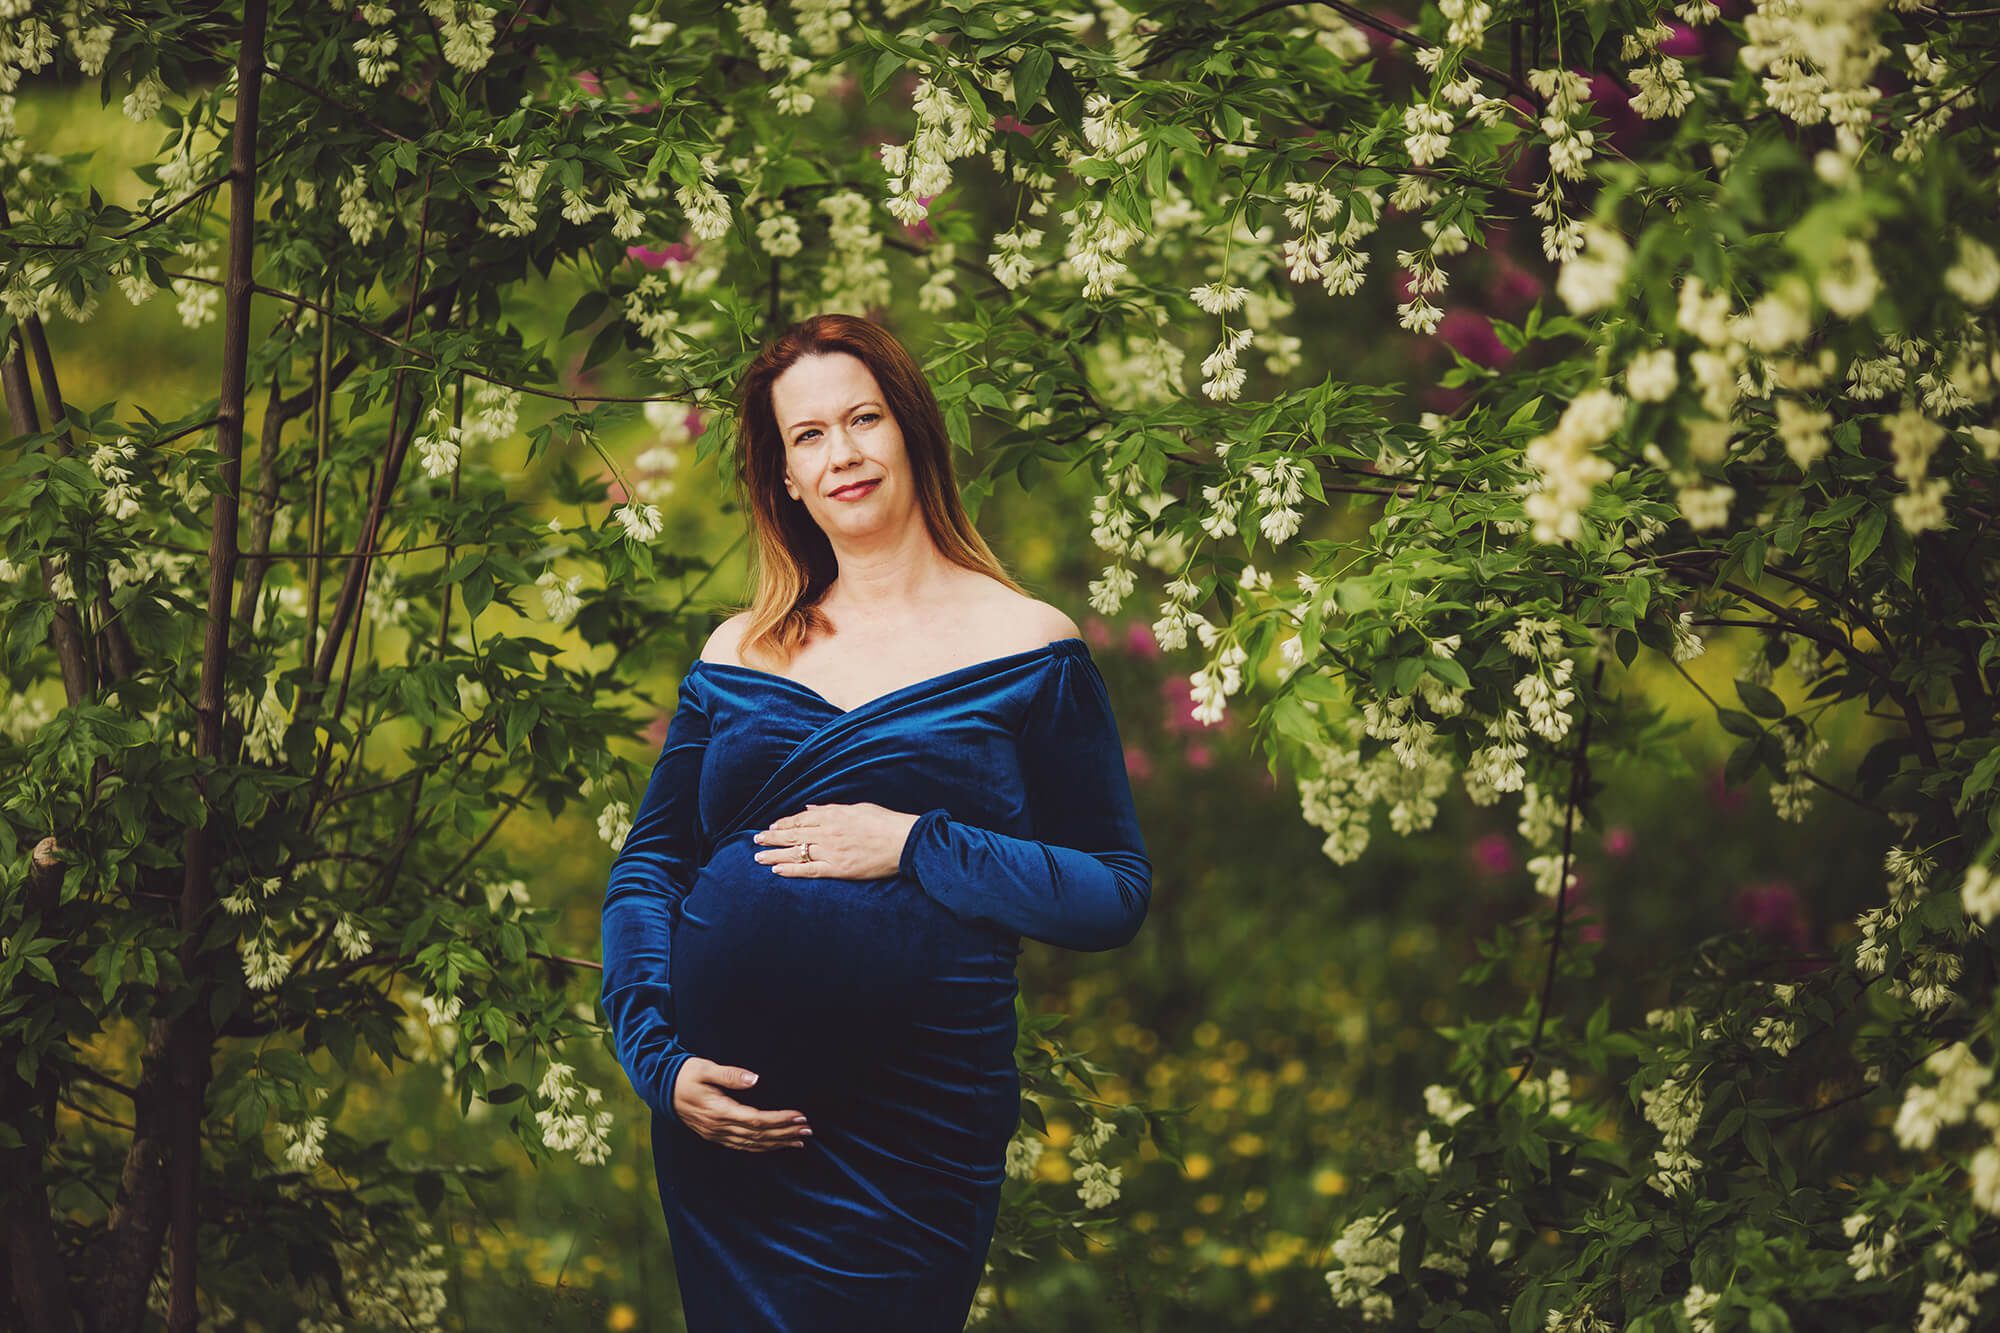 Evie during her maternity session under spring trees with white blooms